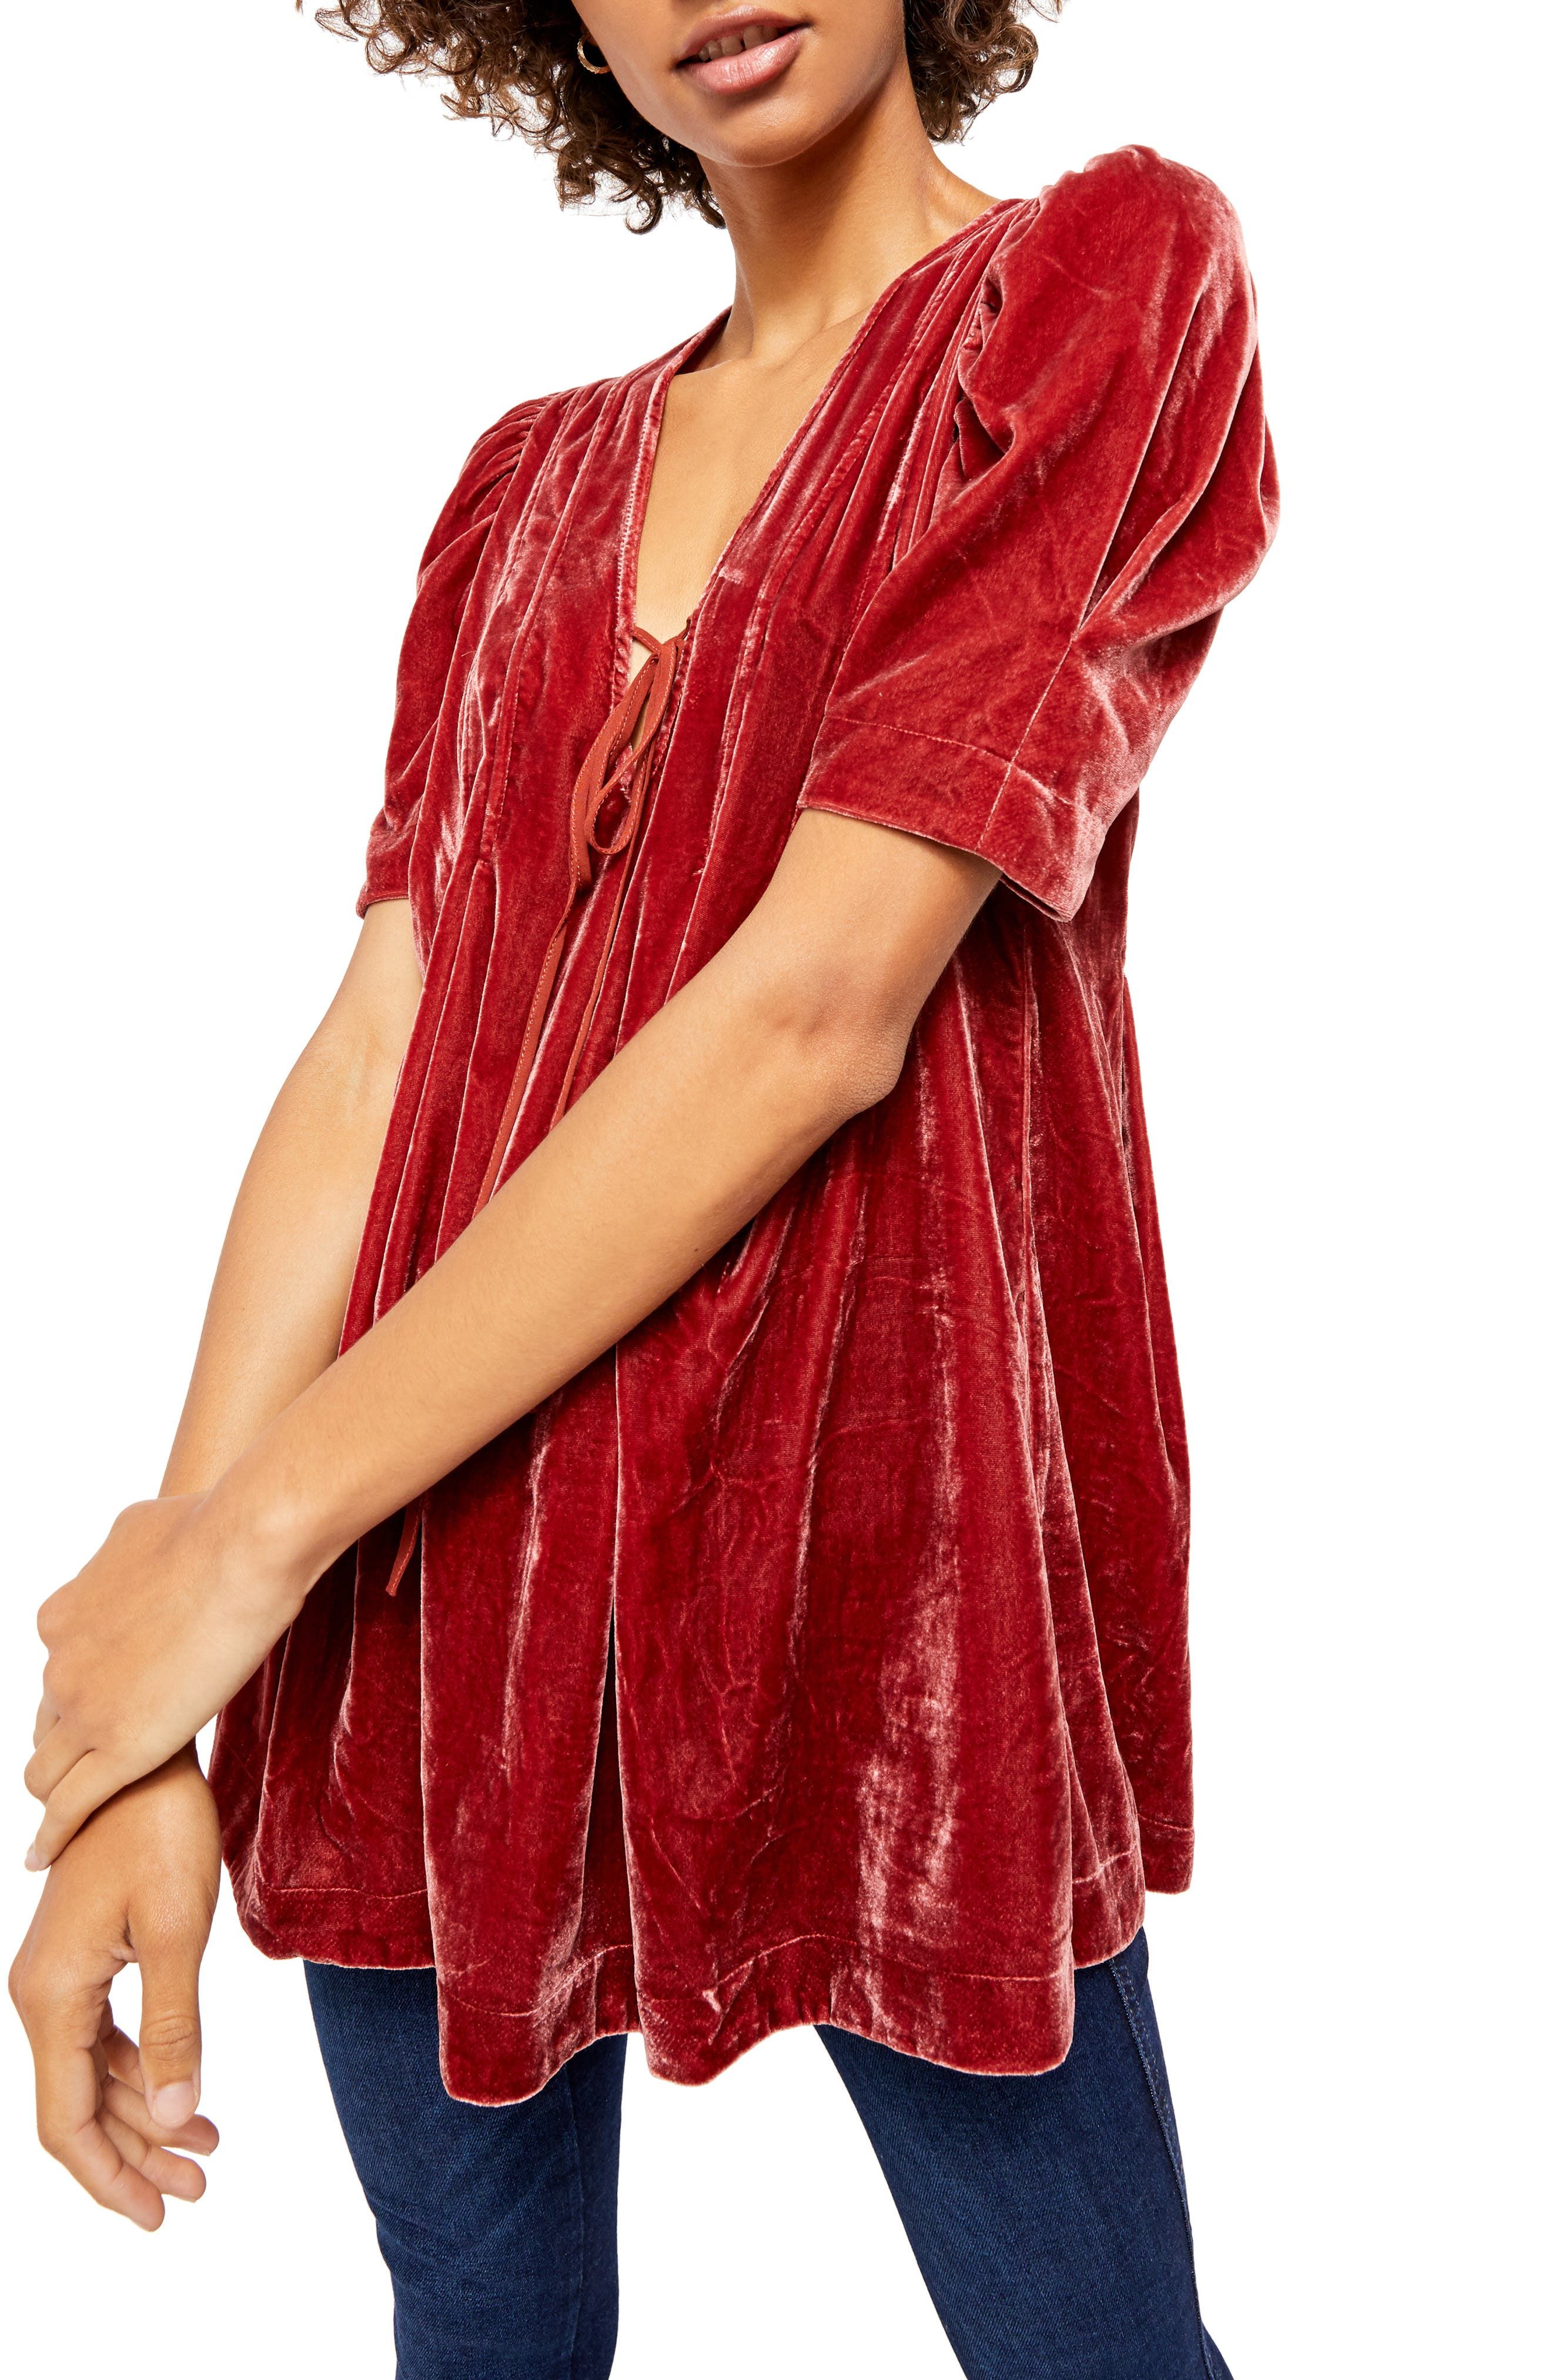 Color: Reds Size Type: Regular Size (Women's): M Sleeve Length: Short Sleeve Type: Blouse Style: Tunic Neckline: V-Neck Pattern: Solid Theme: Classic Material: Rayon